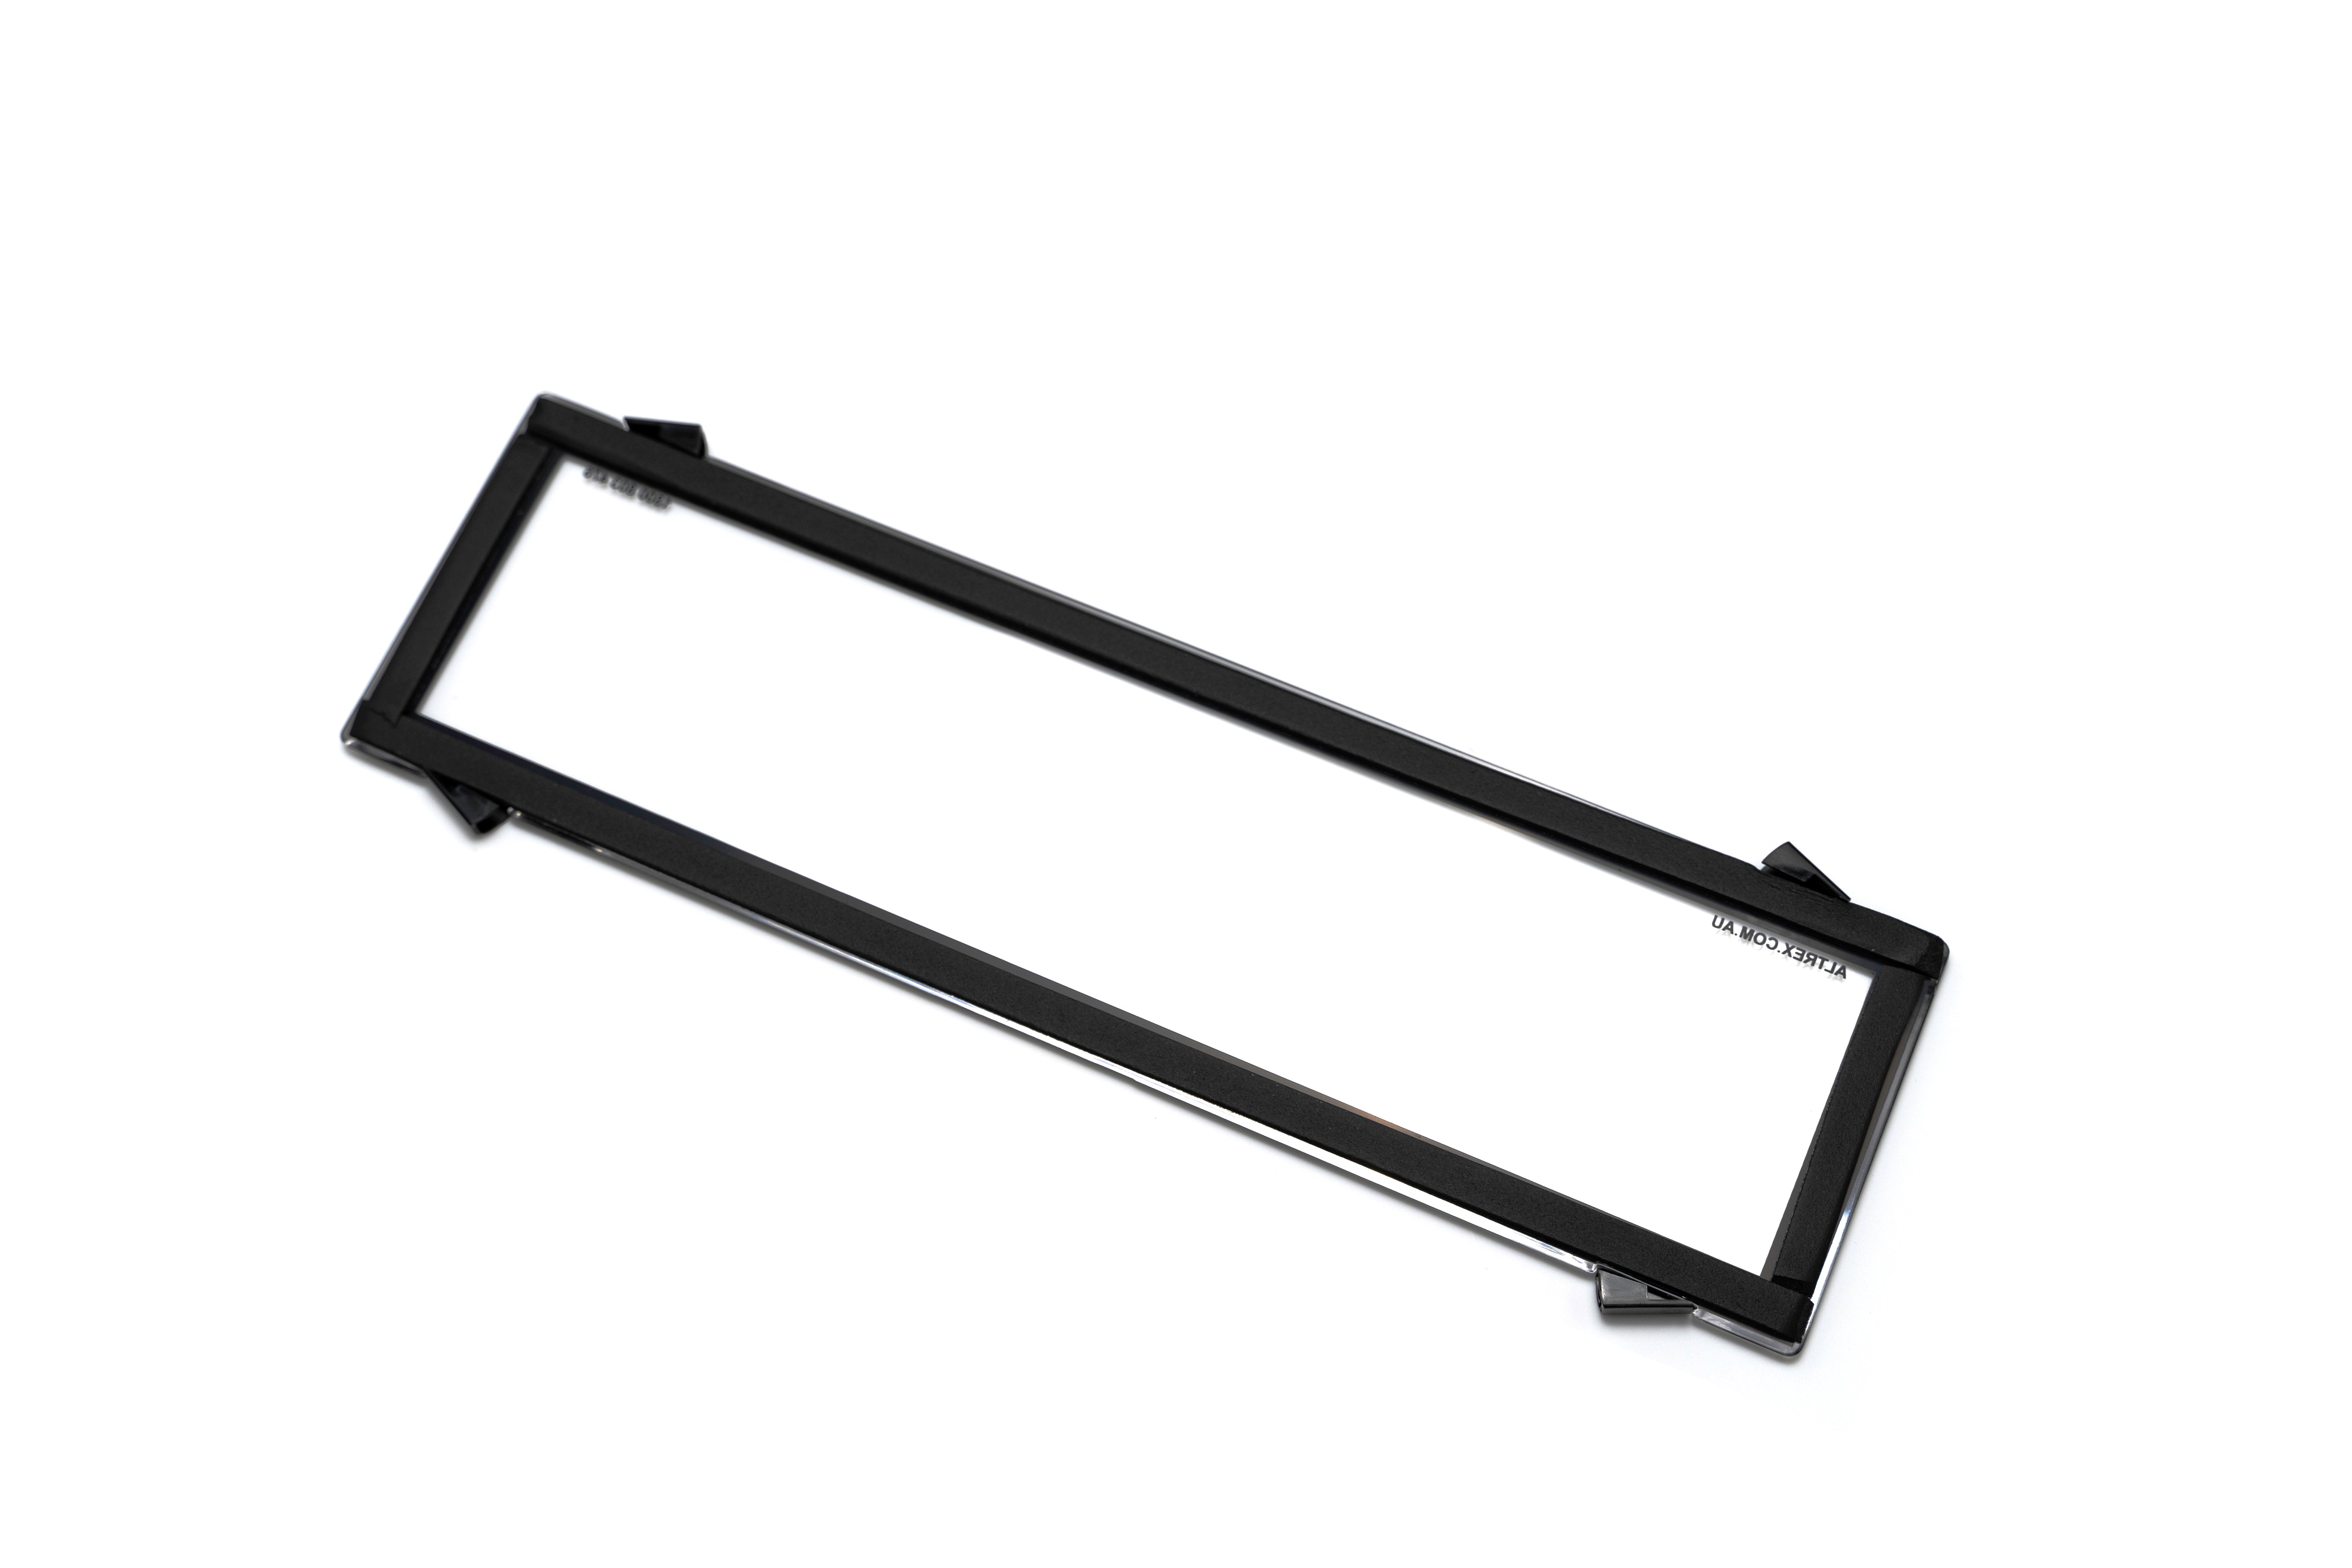 ALTREX Slimline Number Plate Cover 372mm (w) x 100mm (h)